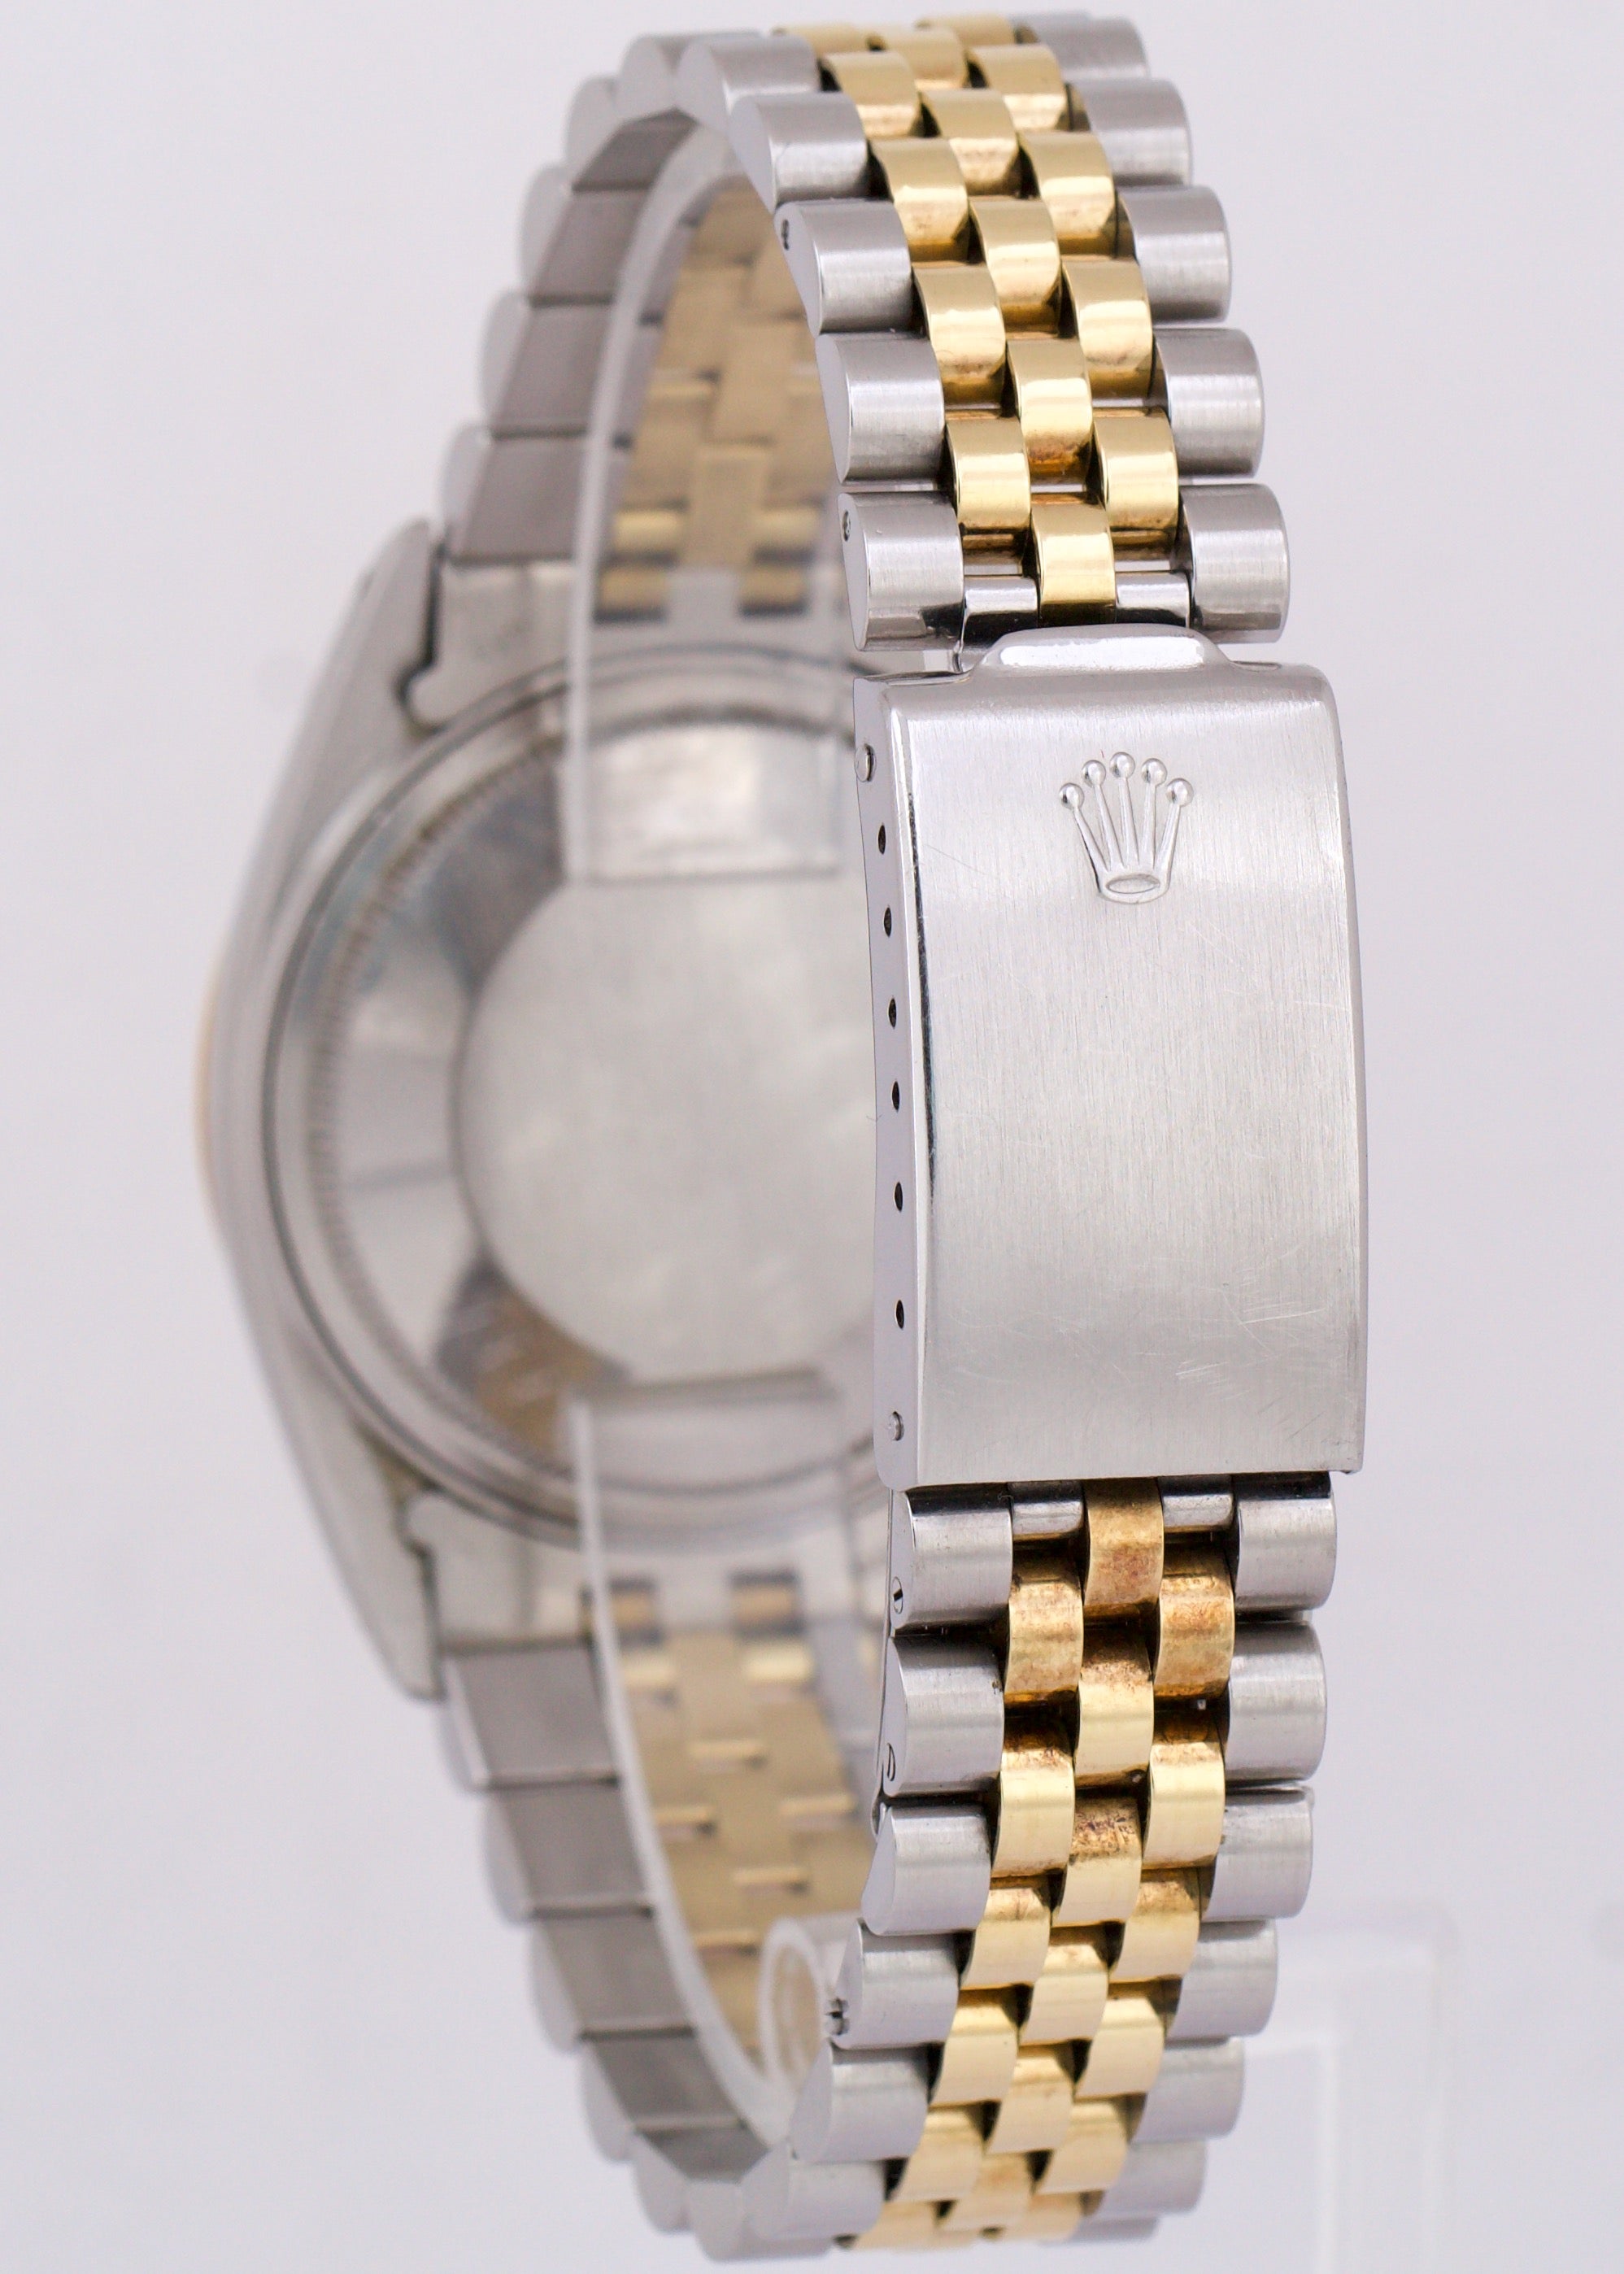 Rolex DateJust 36mm Two-Tone SIMGA DIAL Champagne Gold Steel JUBILEE Watch 1601